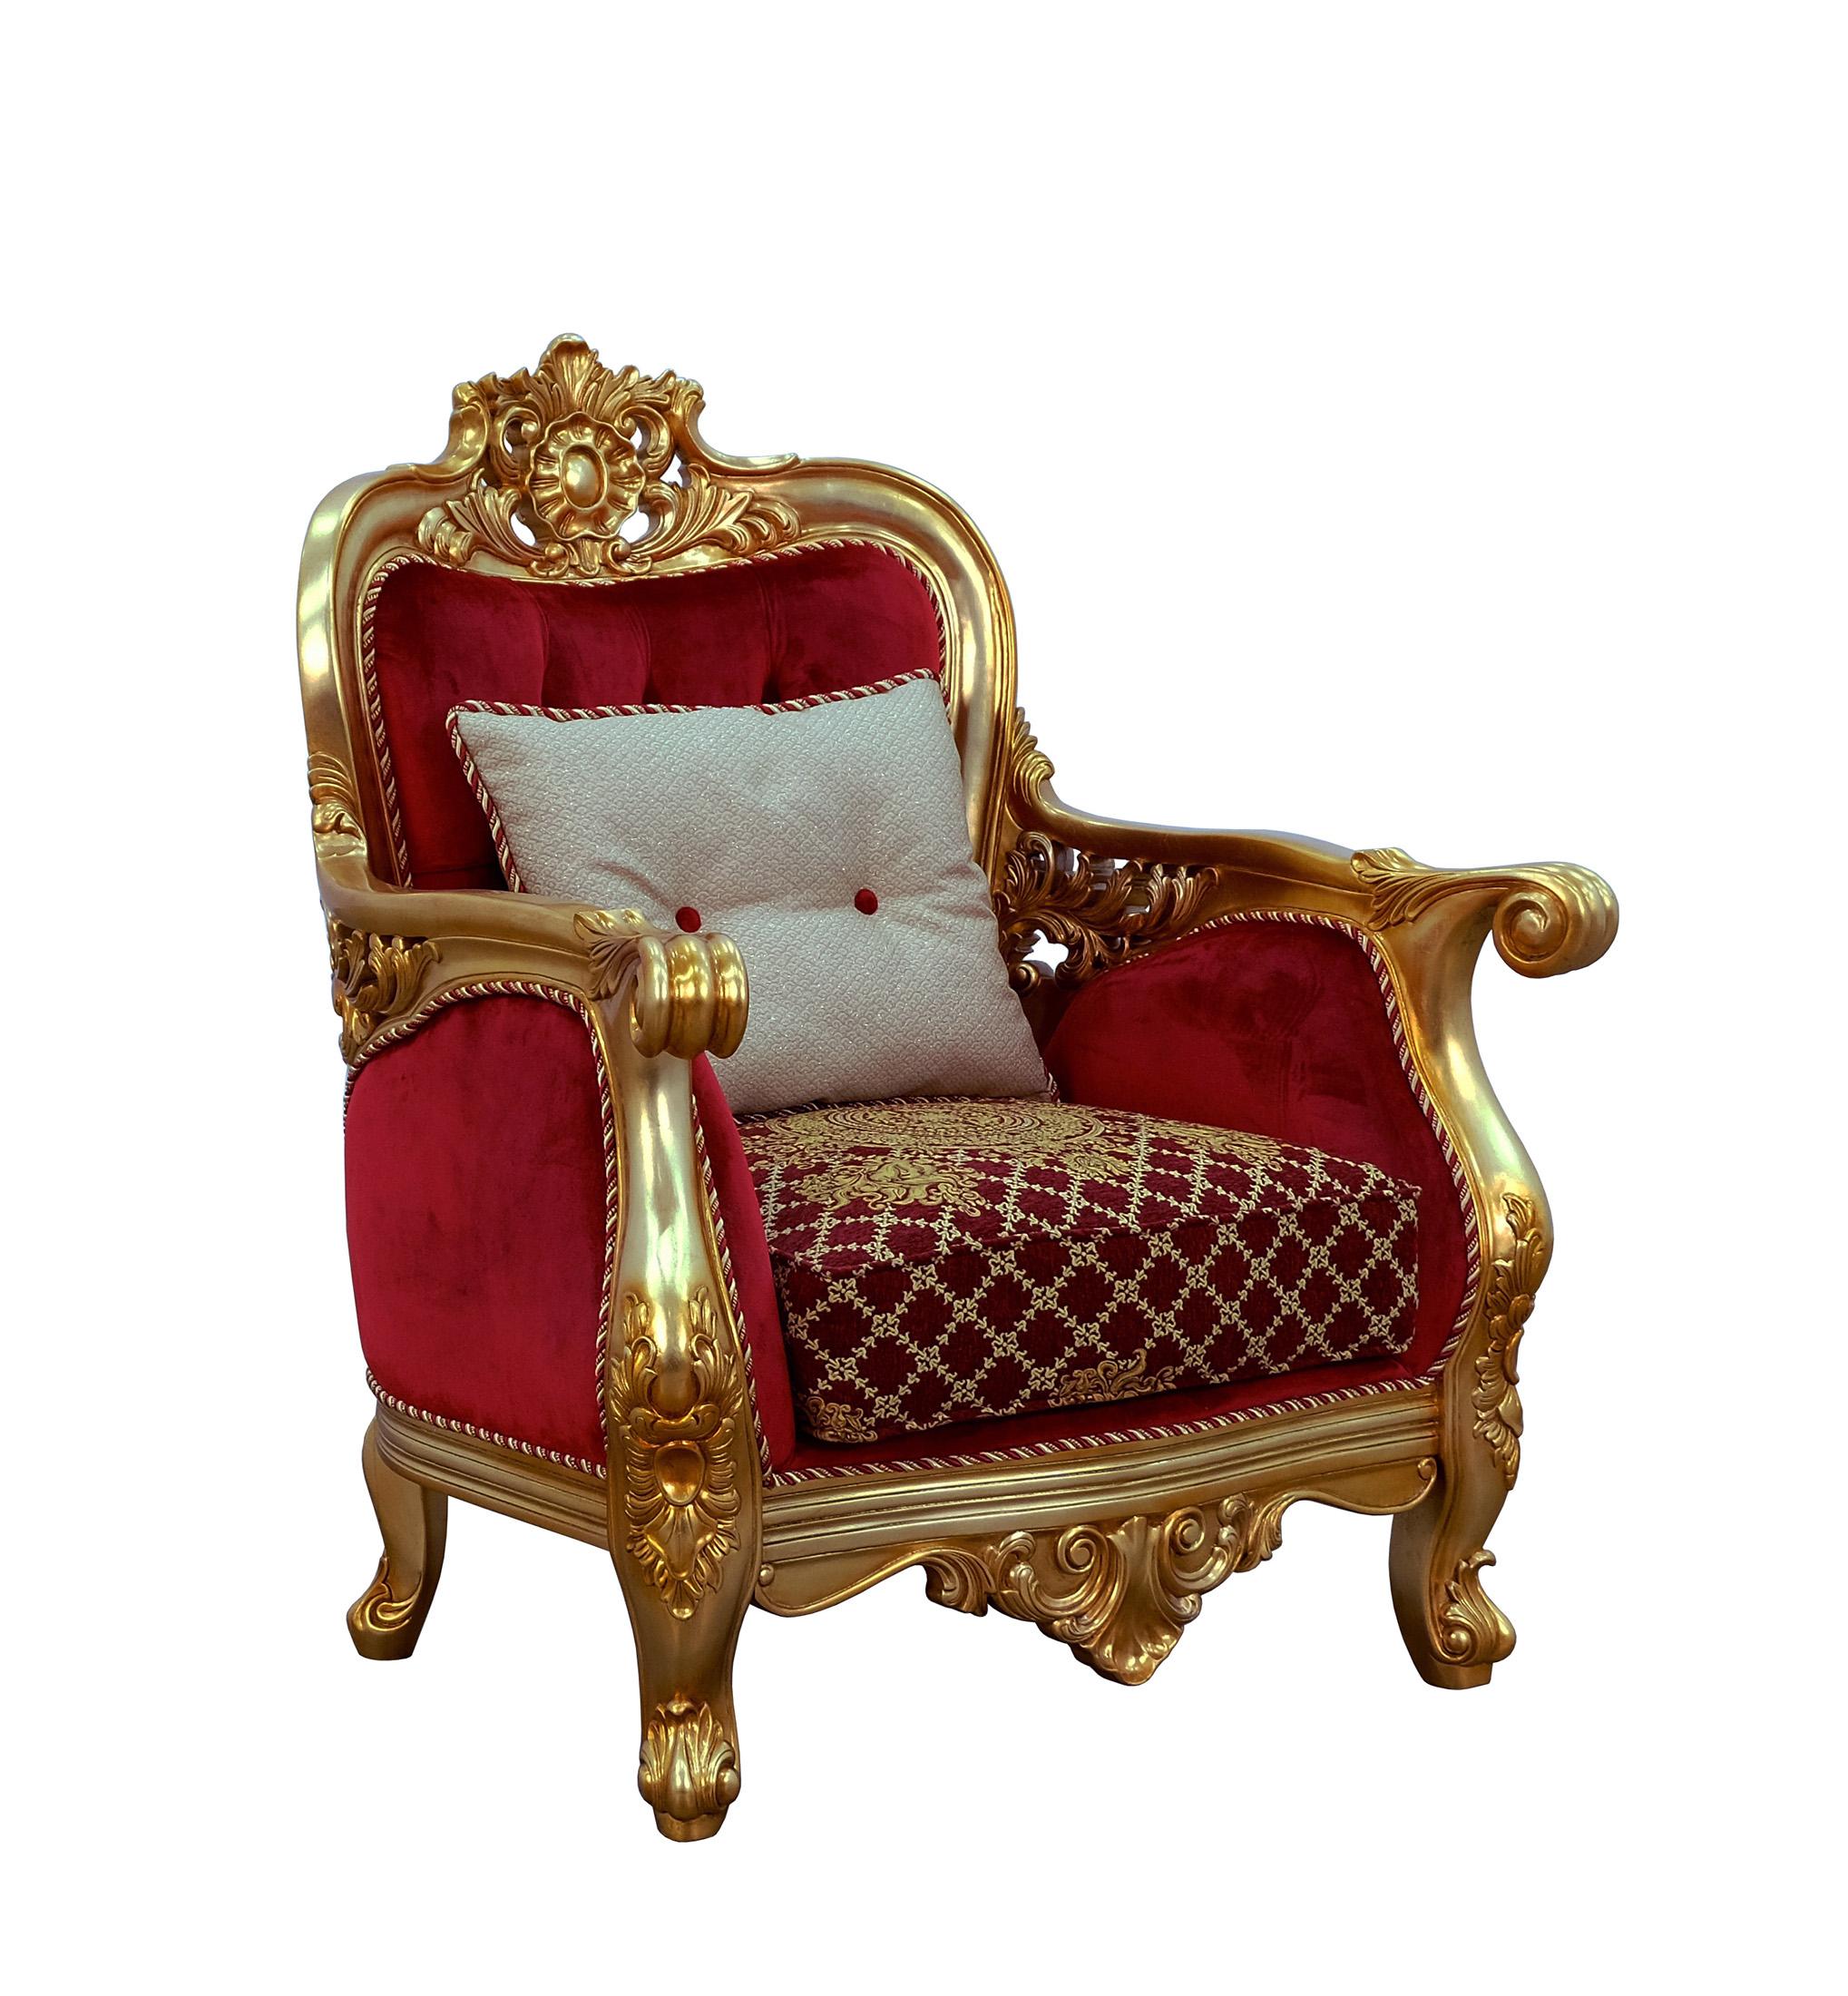 Classic, Traditional Arm Chair BELLAGIO II 30013-C in Antique, Red, Gold Velvet